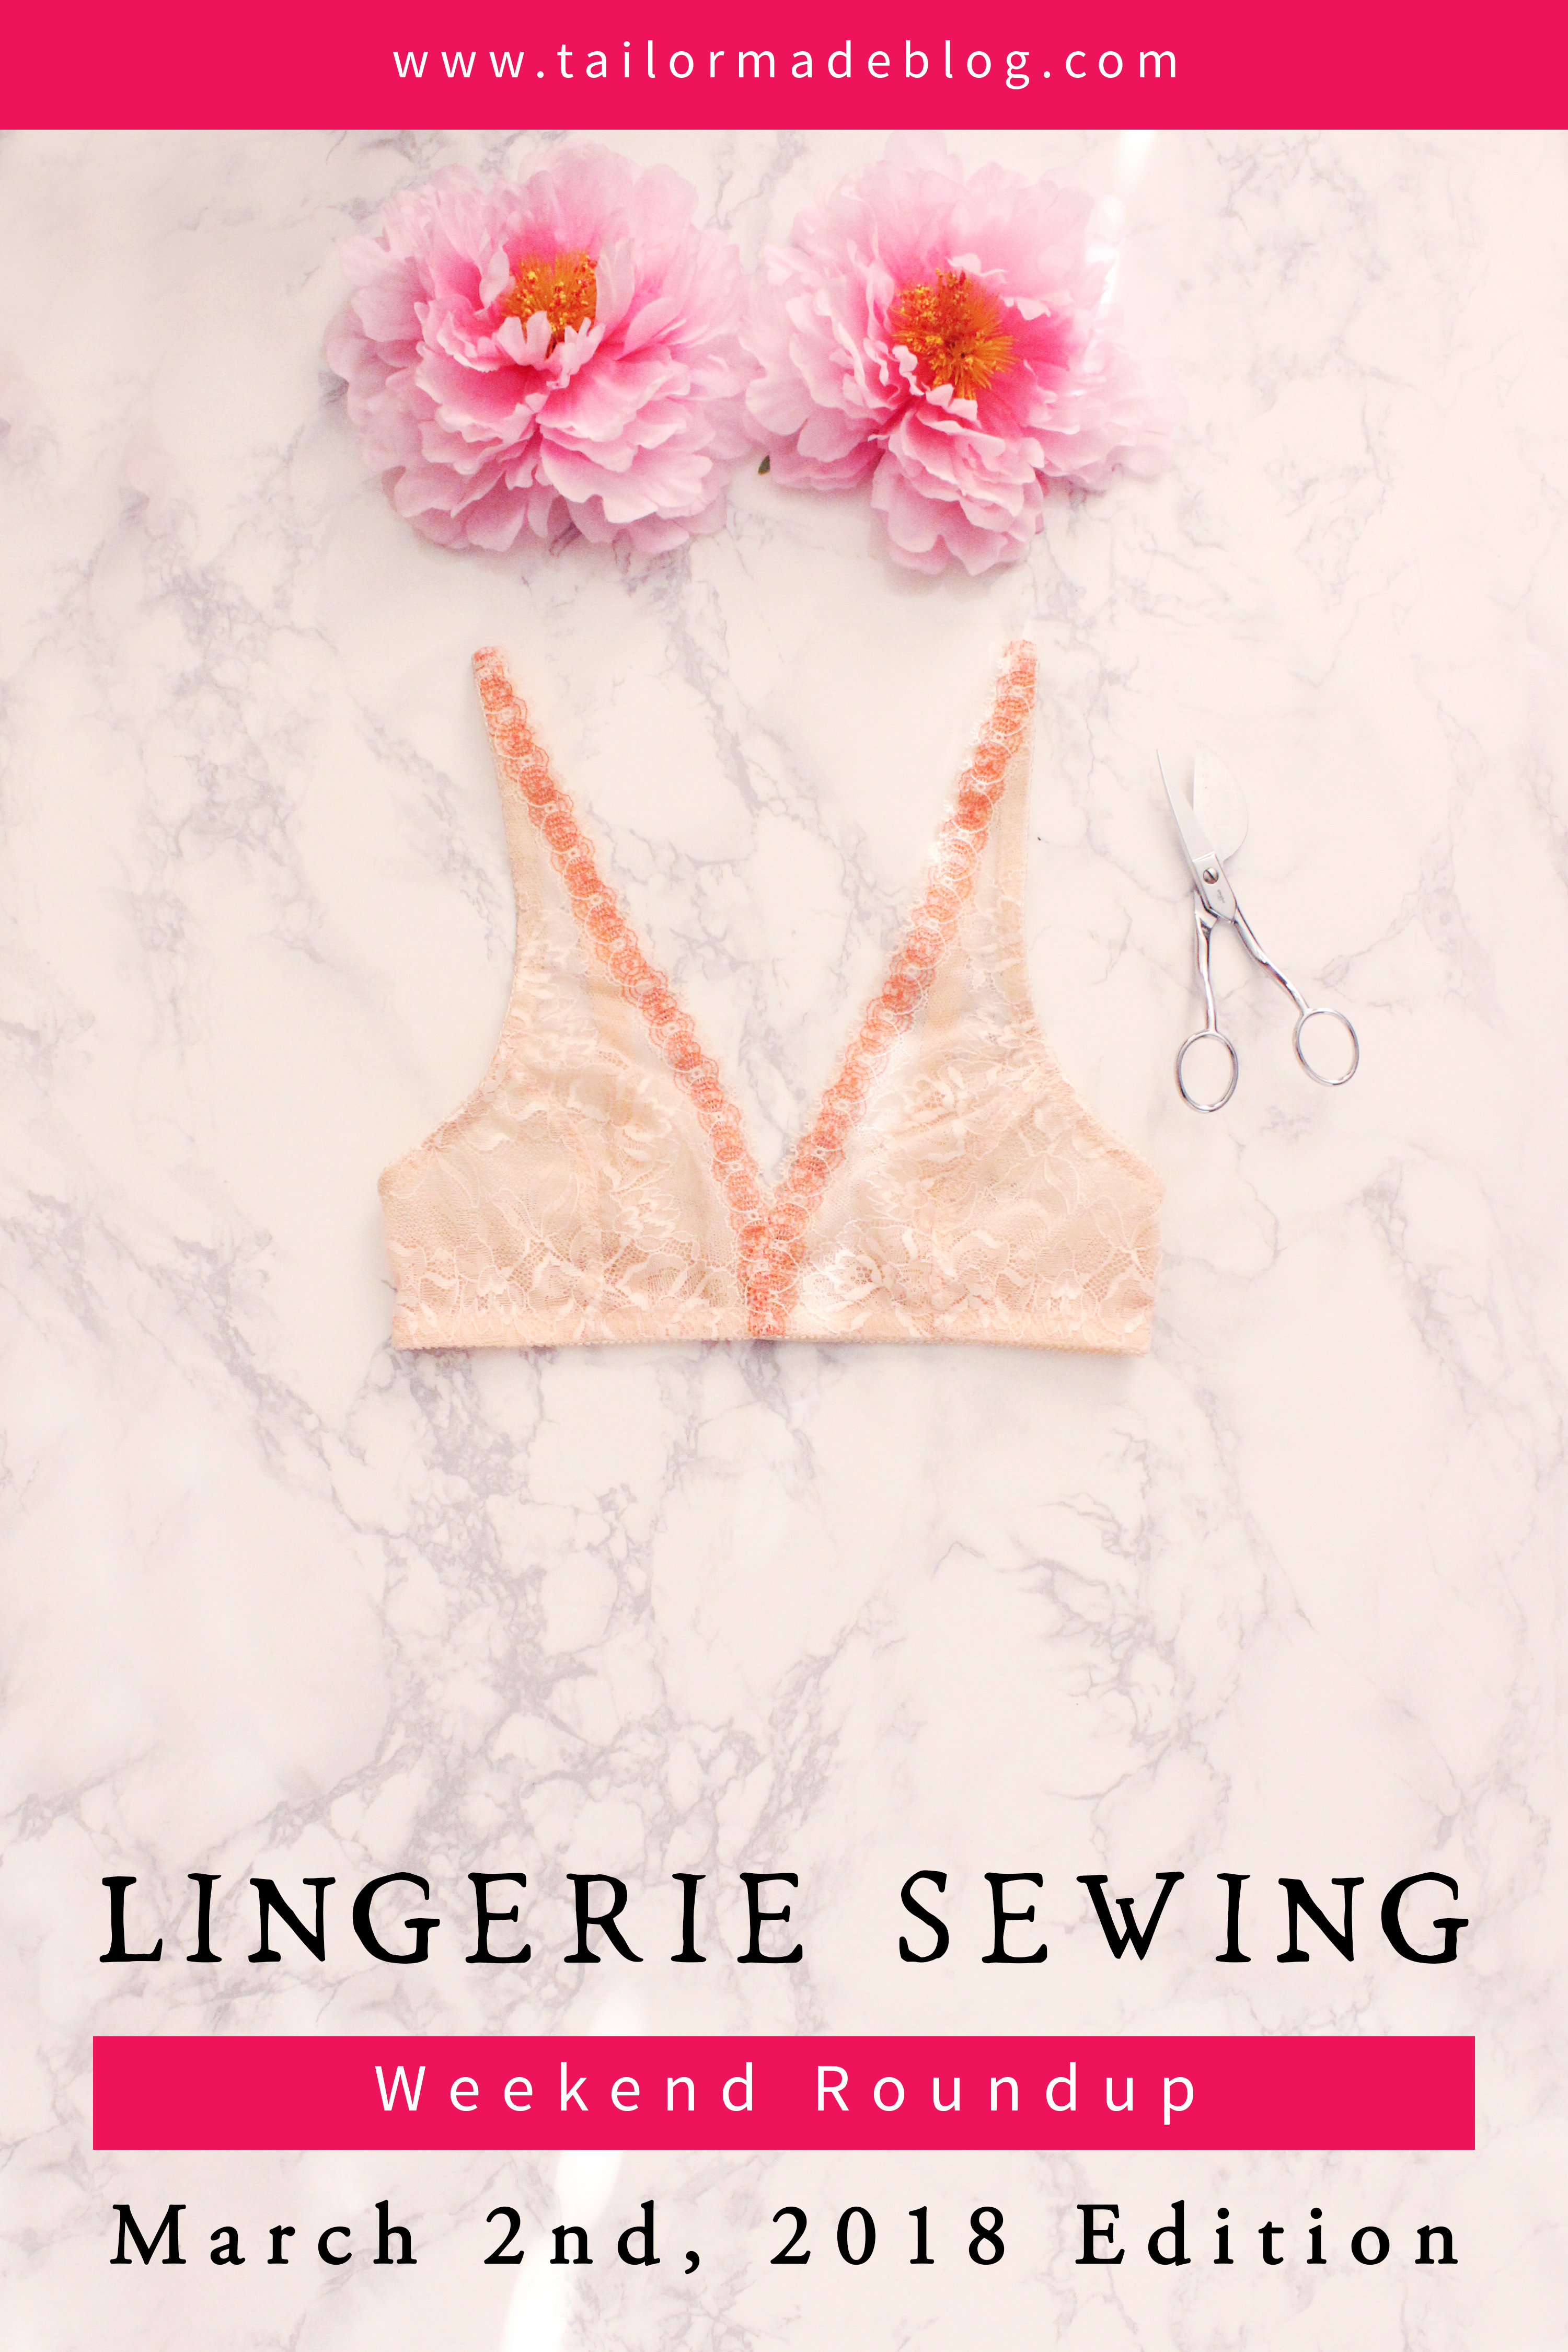 March 2nd, 2018 Lingerie Sewing Weekend Round Up Latest news and makes and sewing projects from the lingerie sewing bra making community